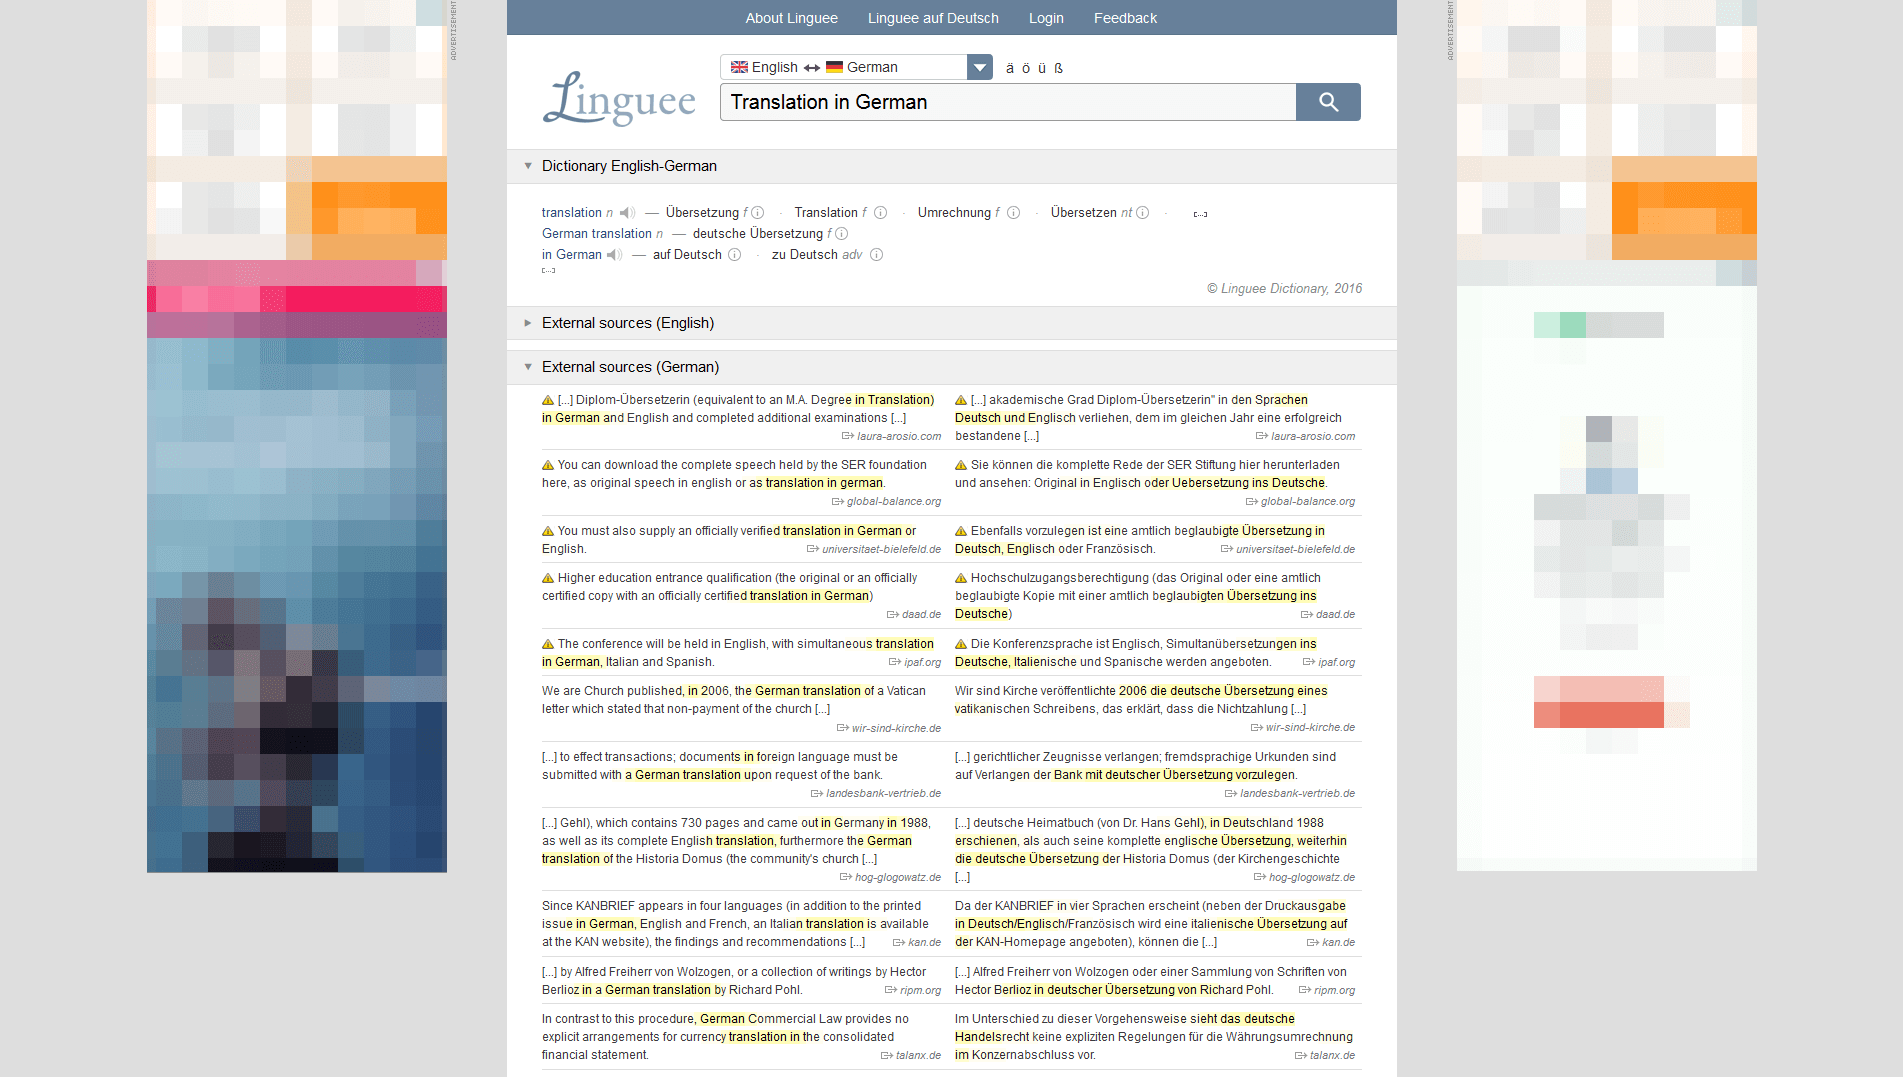 The Linguee results page with search engine matches